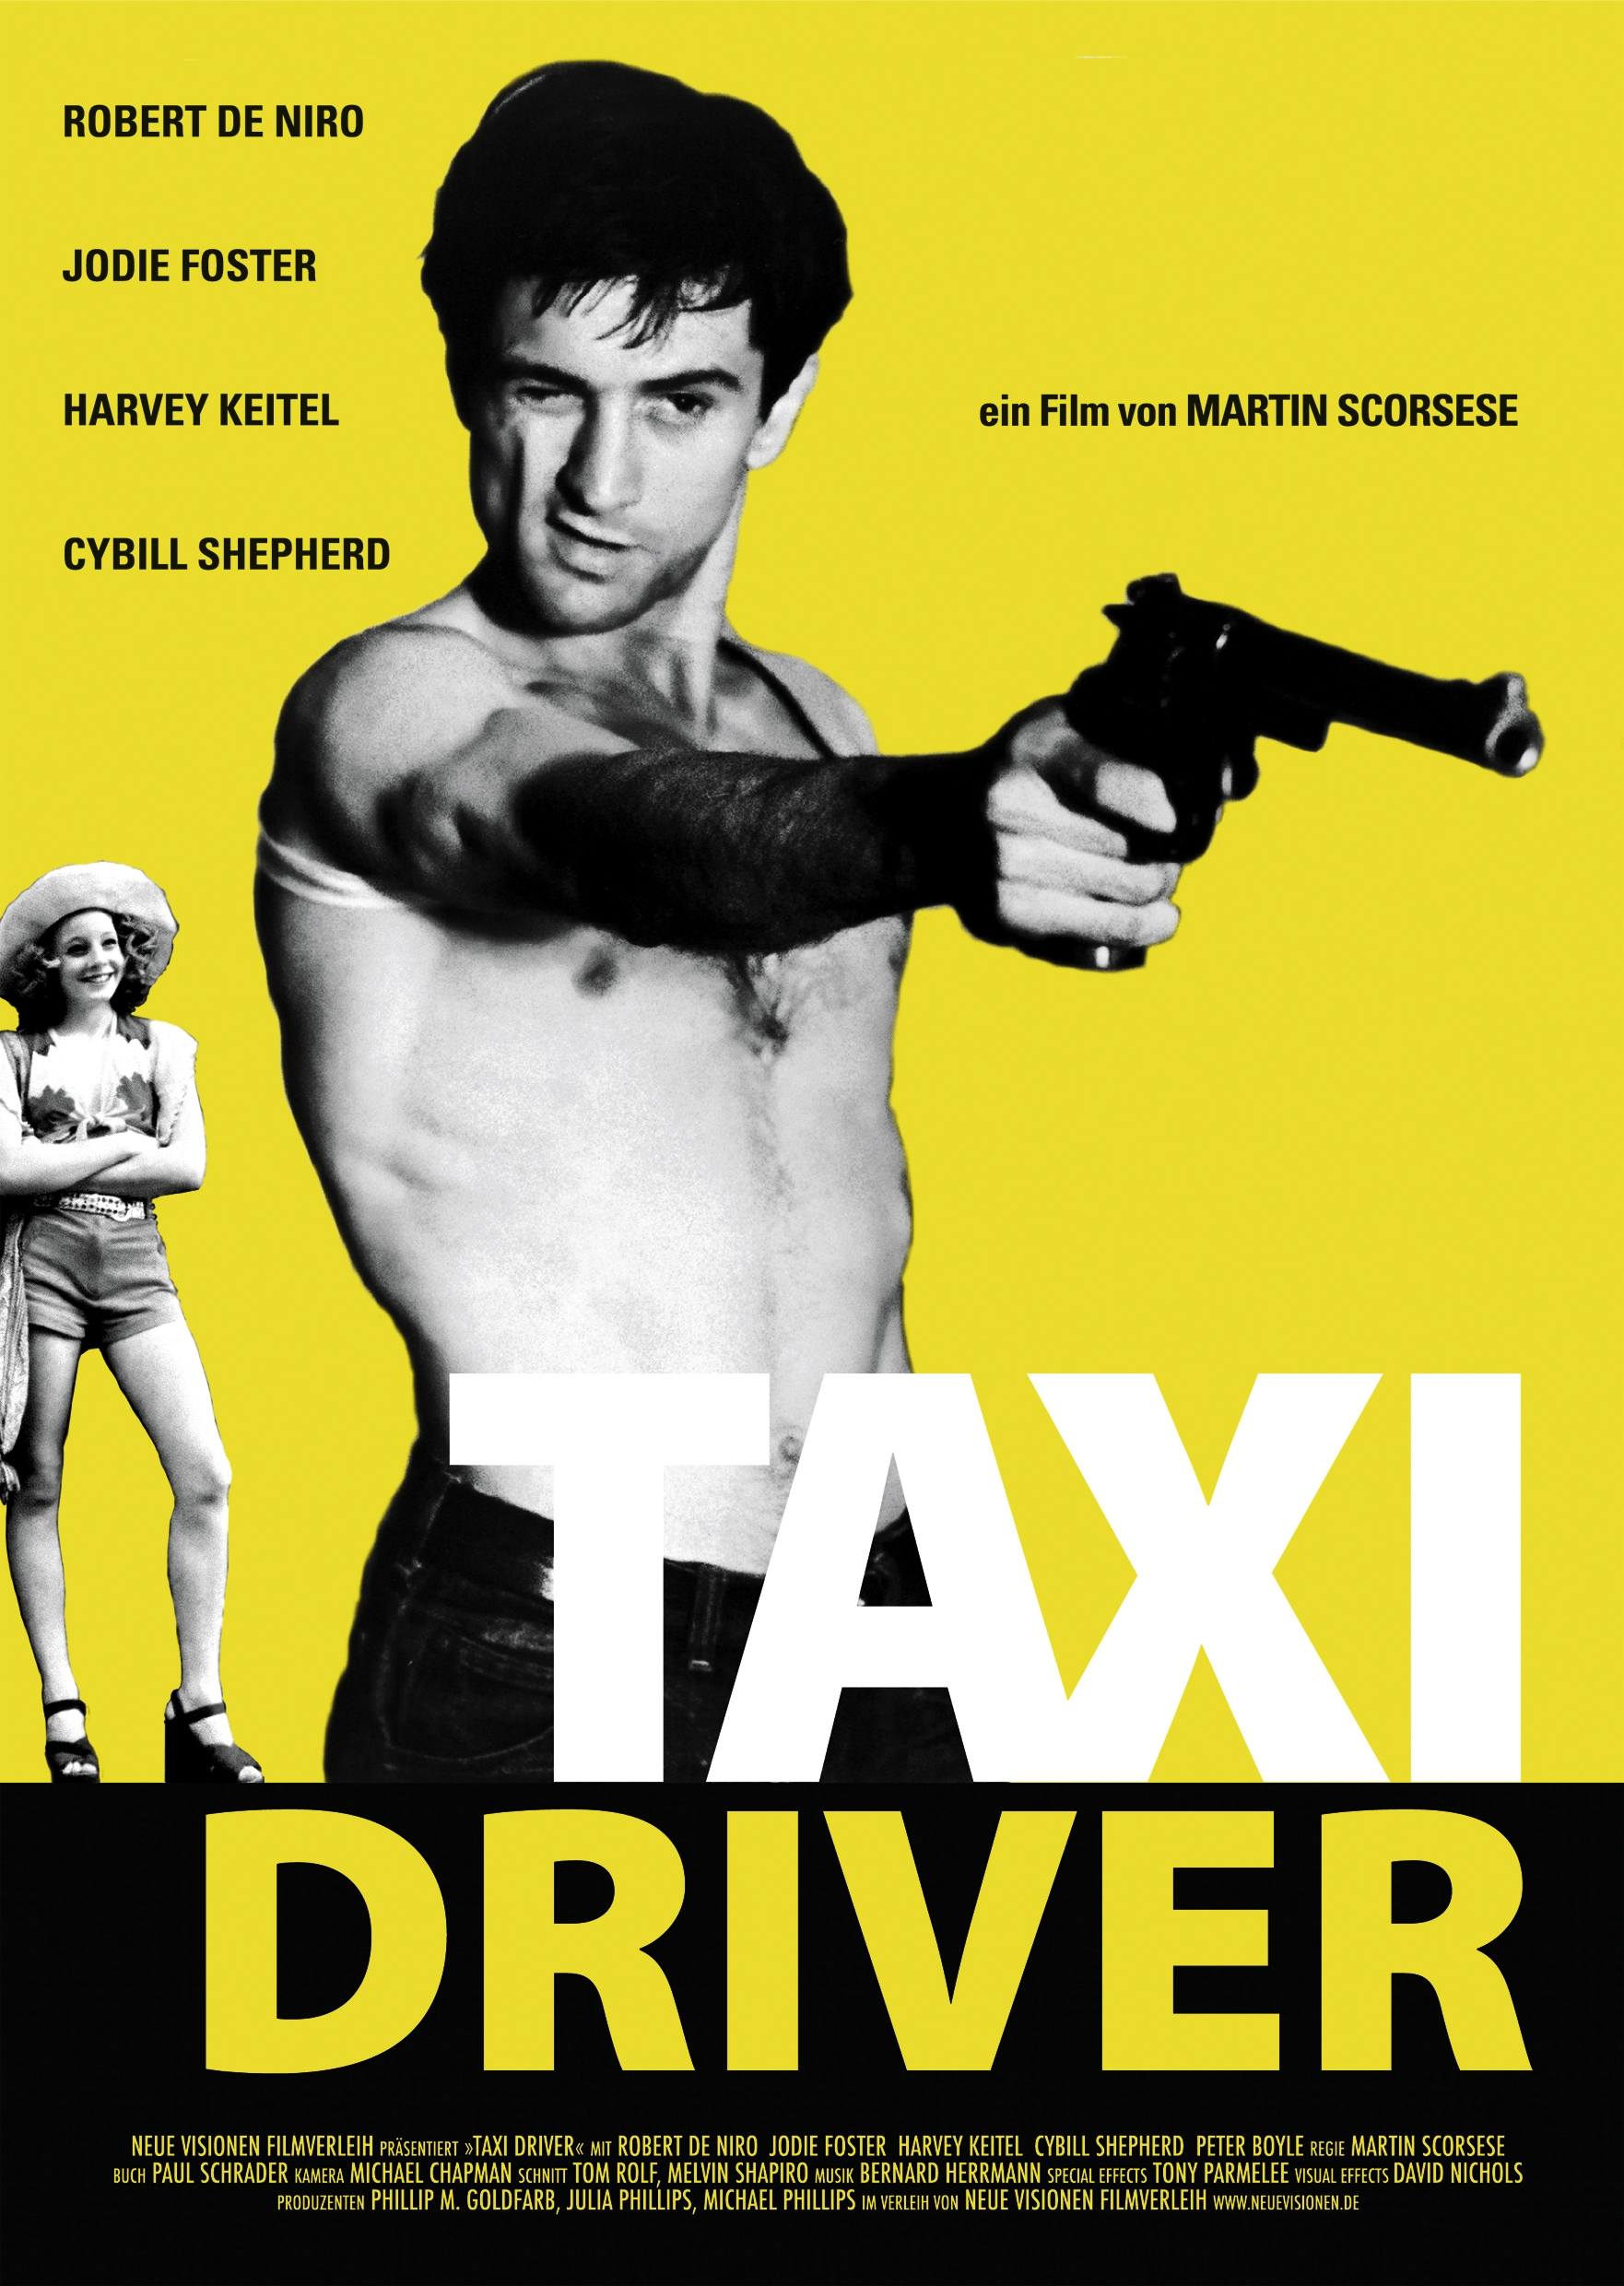 the last taxi driver review